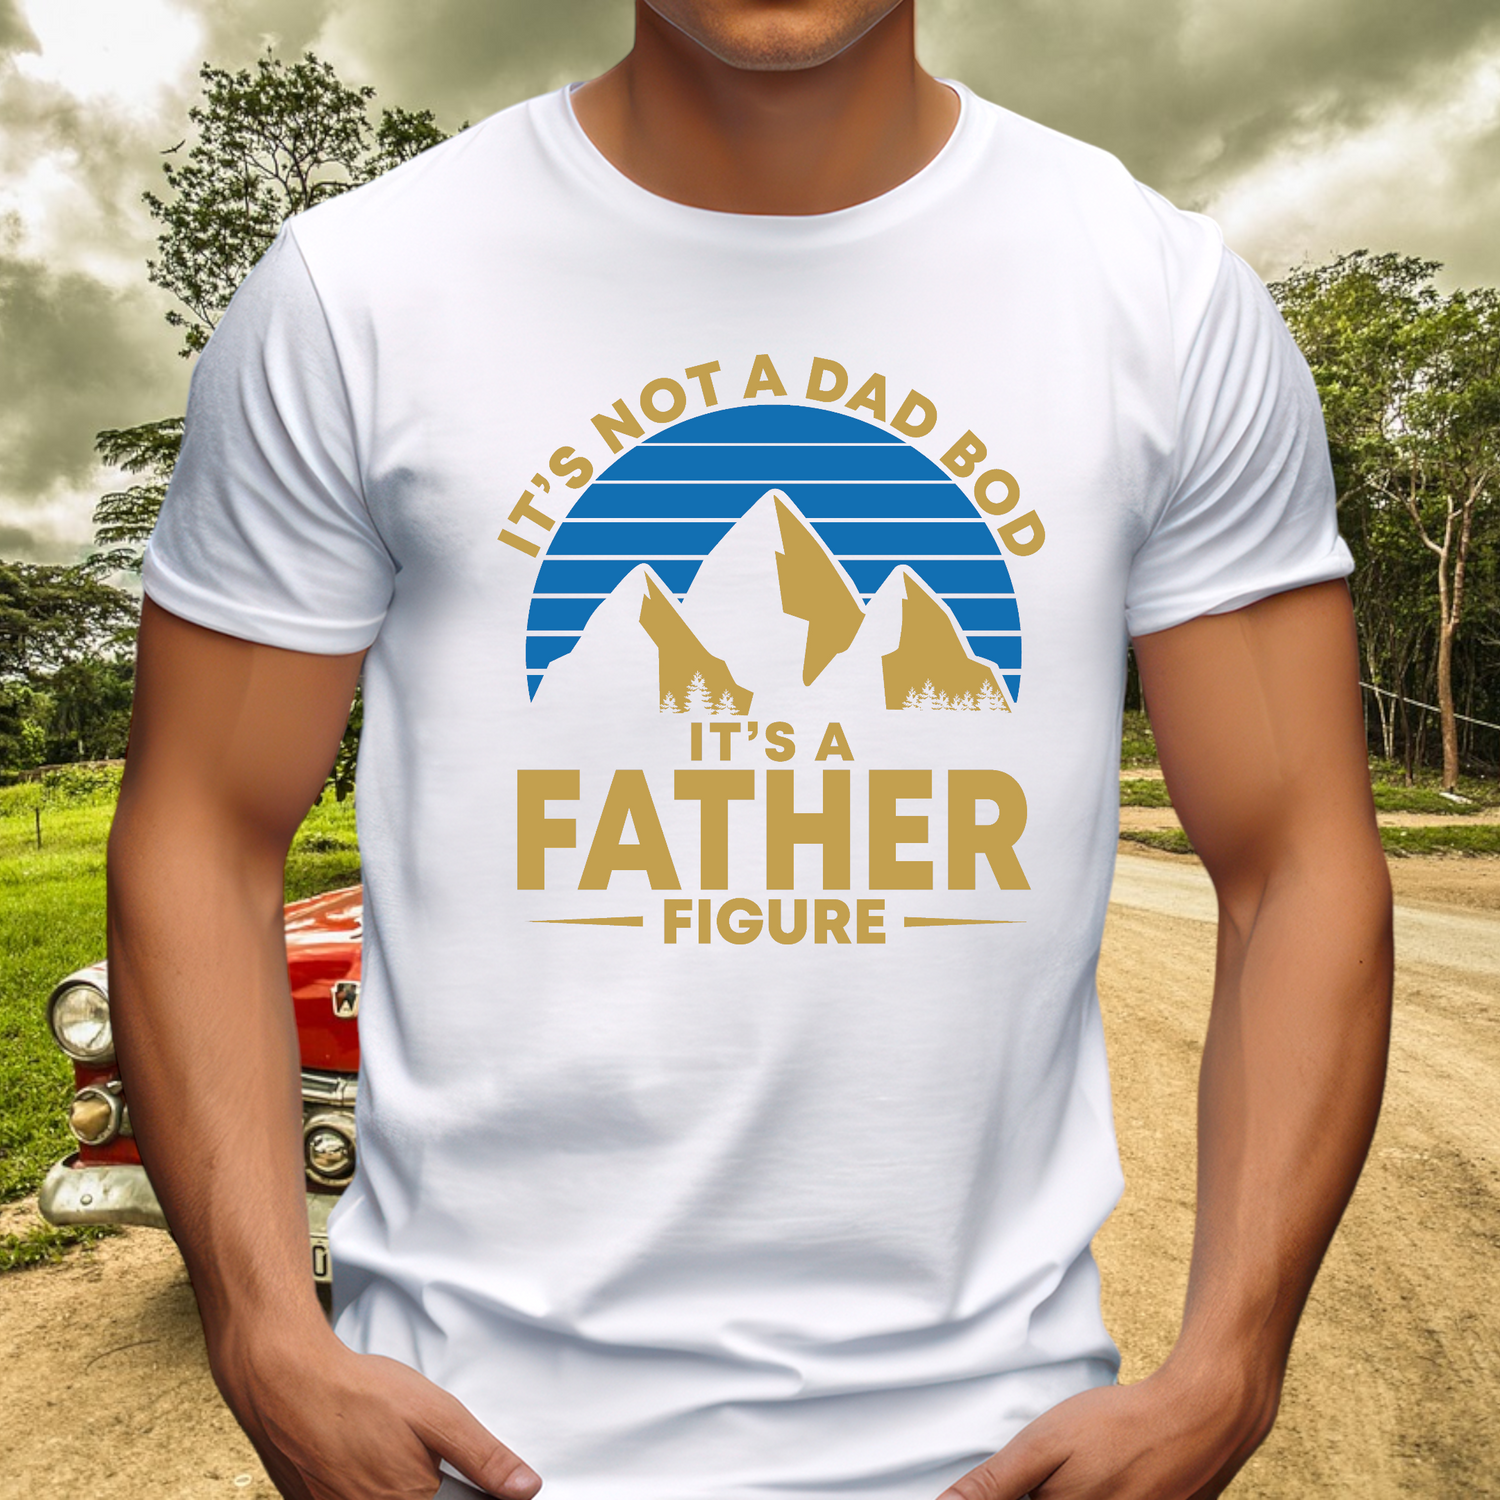 Father’s Day Tees